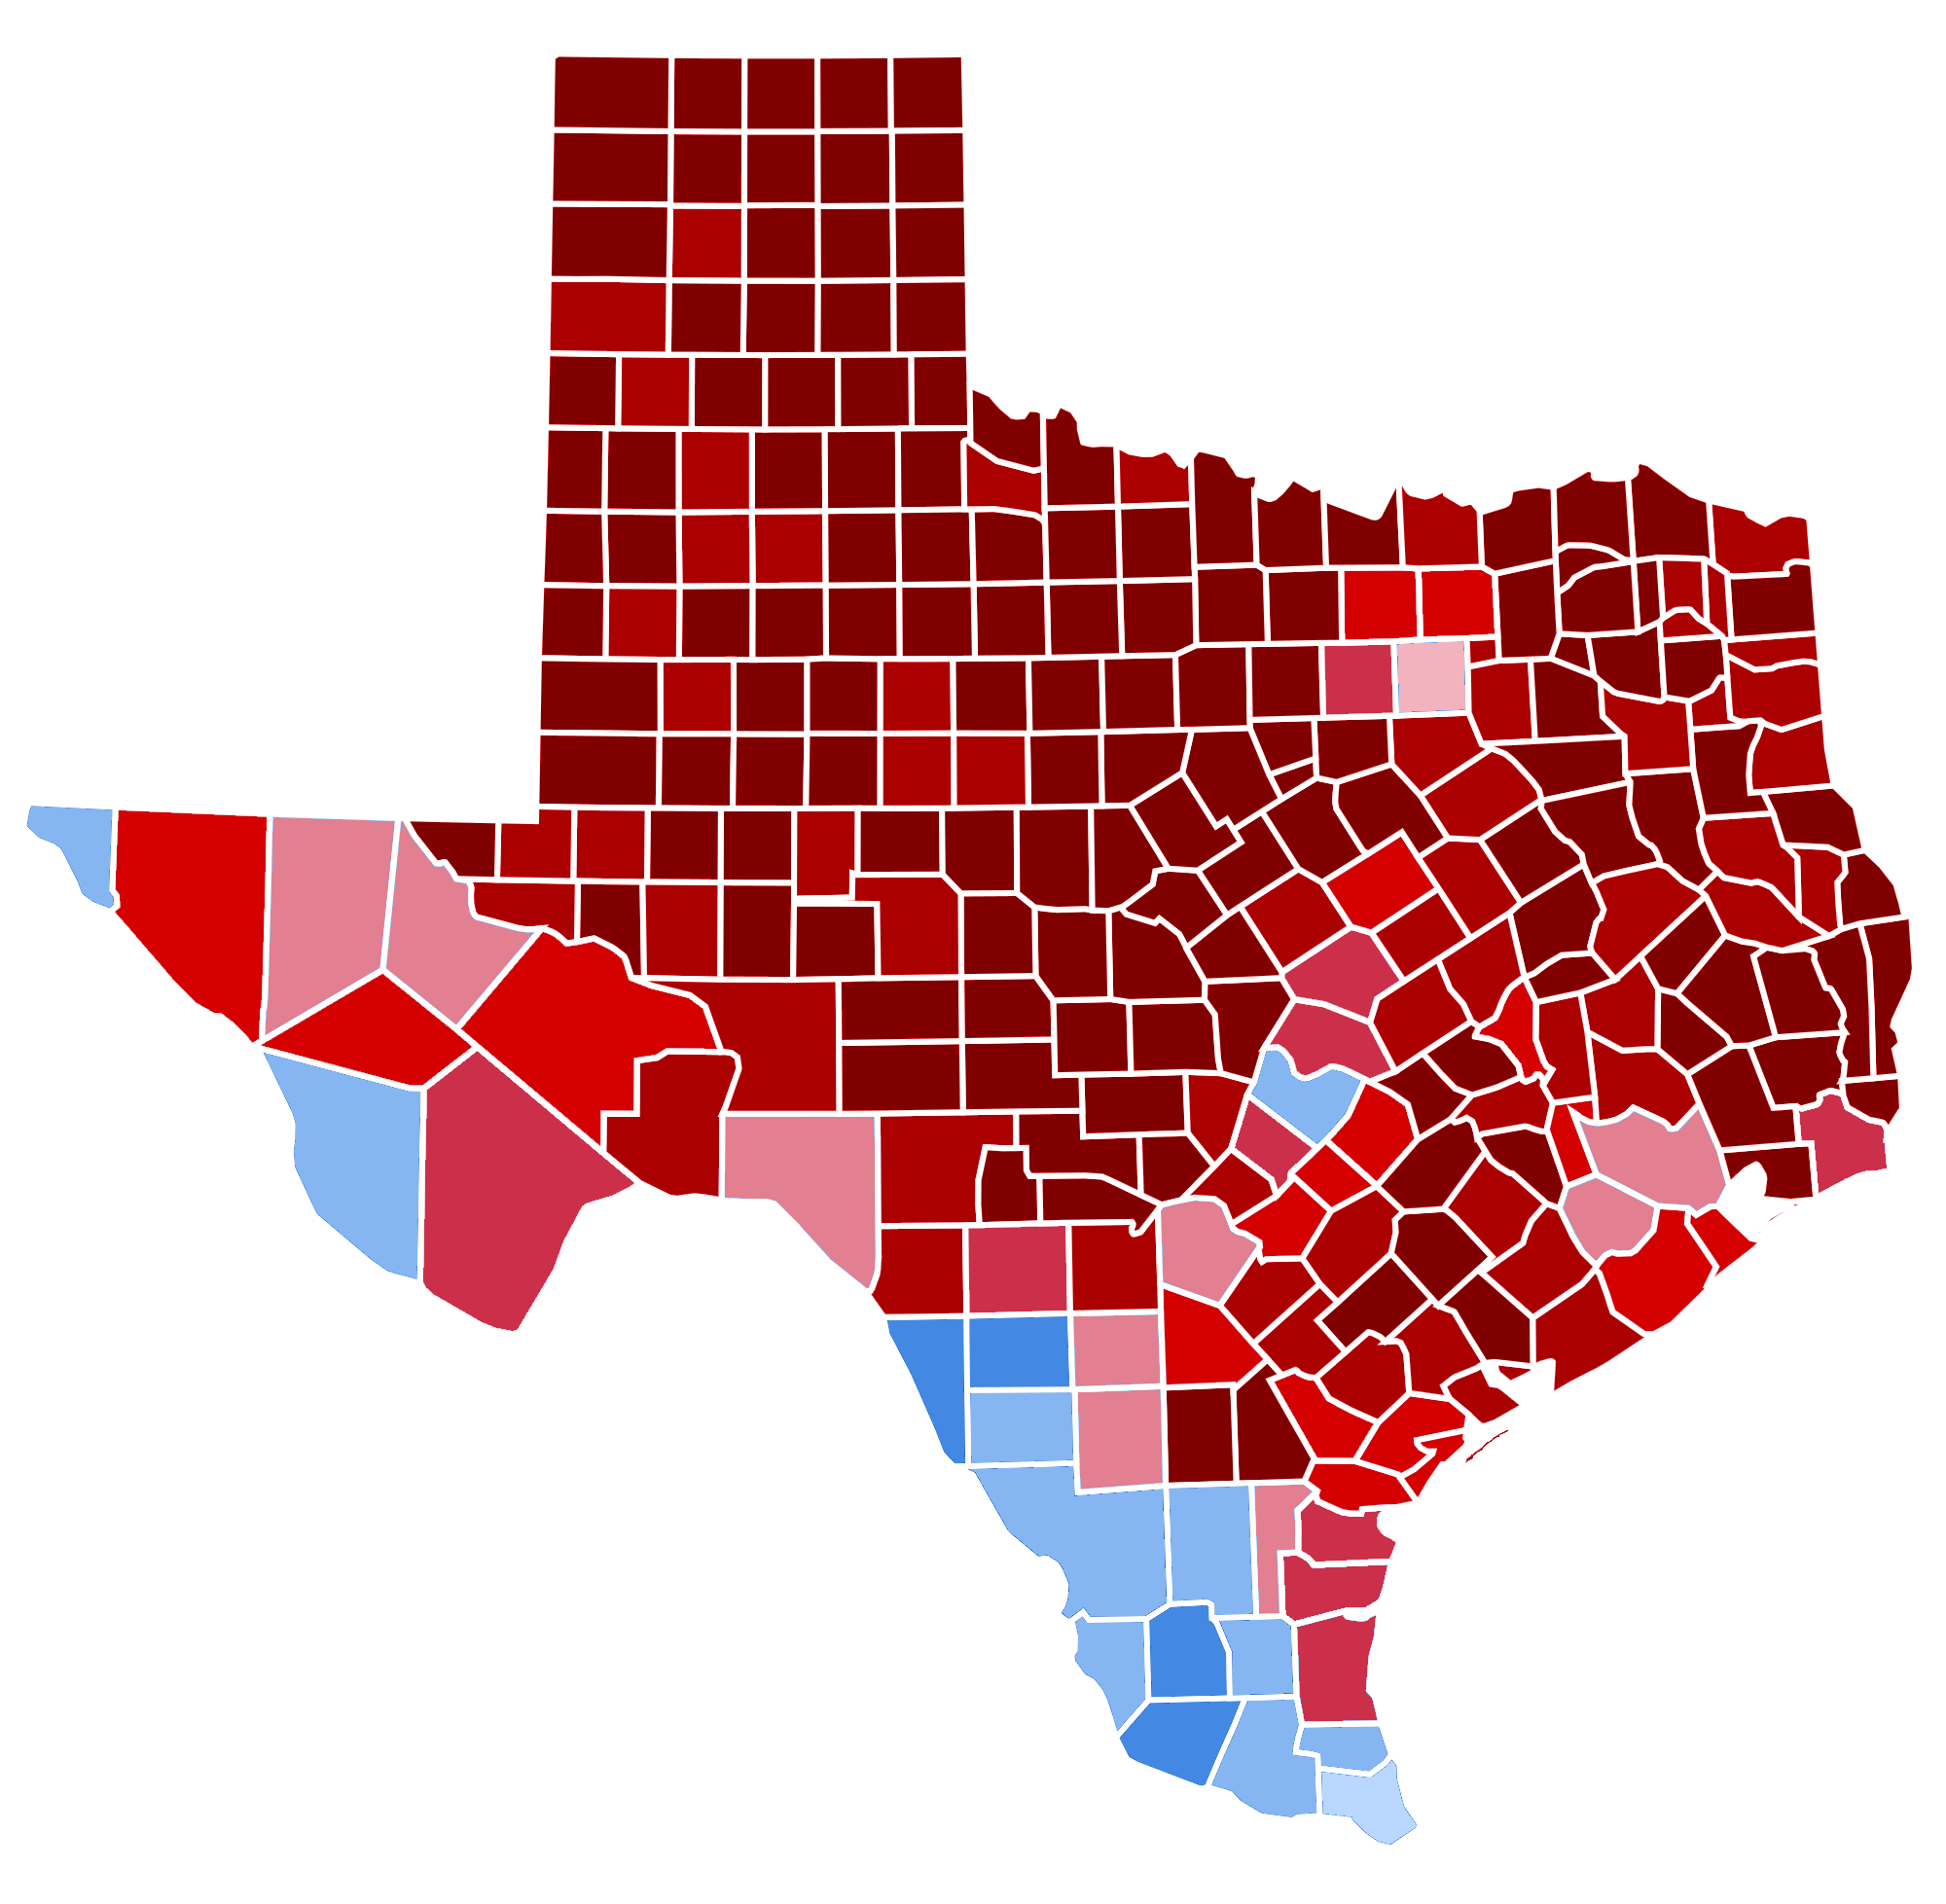 Texas_Presidential_Election_Results_2016_Republican_Landslide_15.06%.png